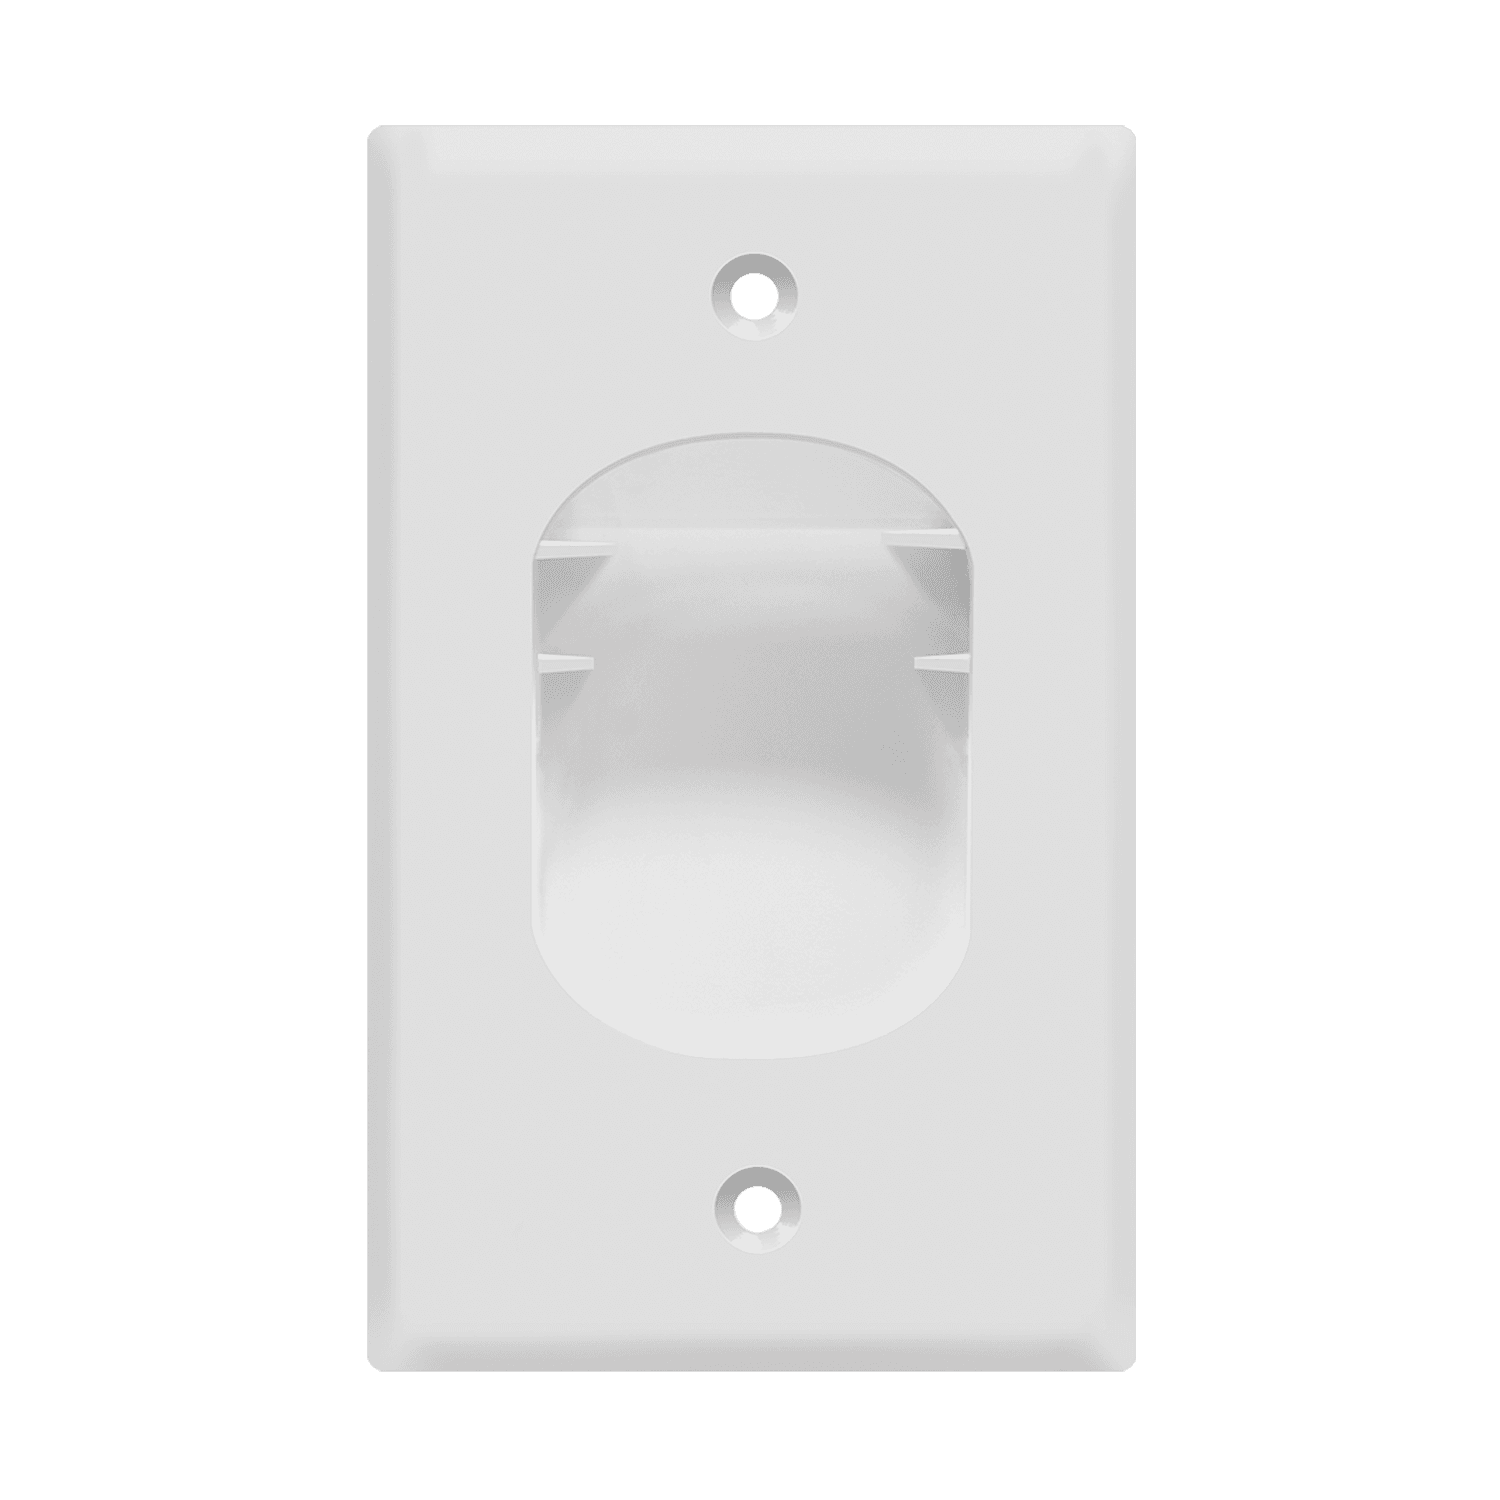 Enerlites 8881-W Single Gang Recessed Cable Wall Plate